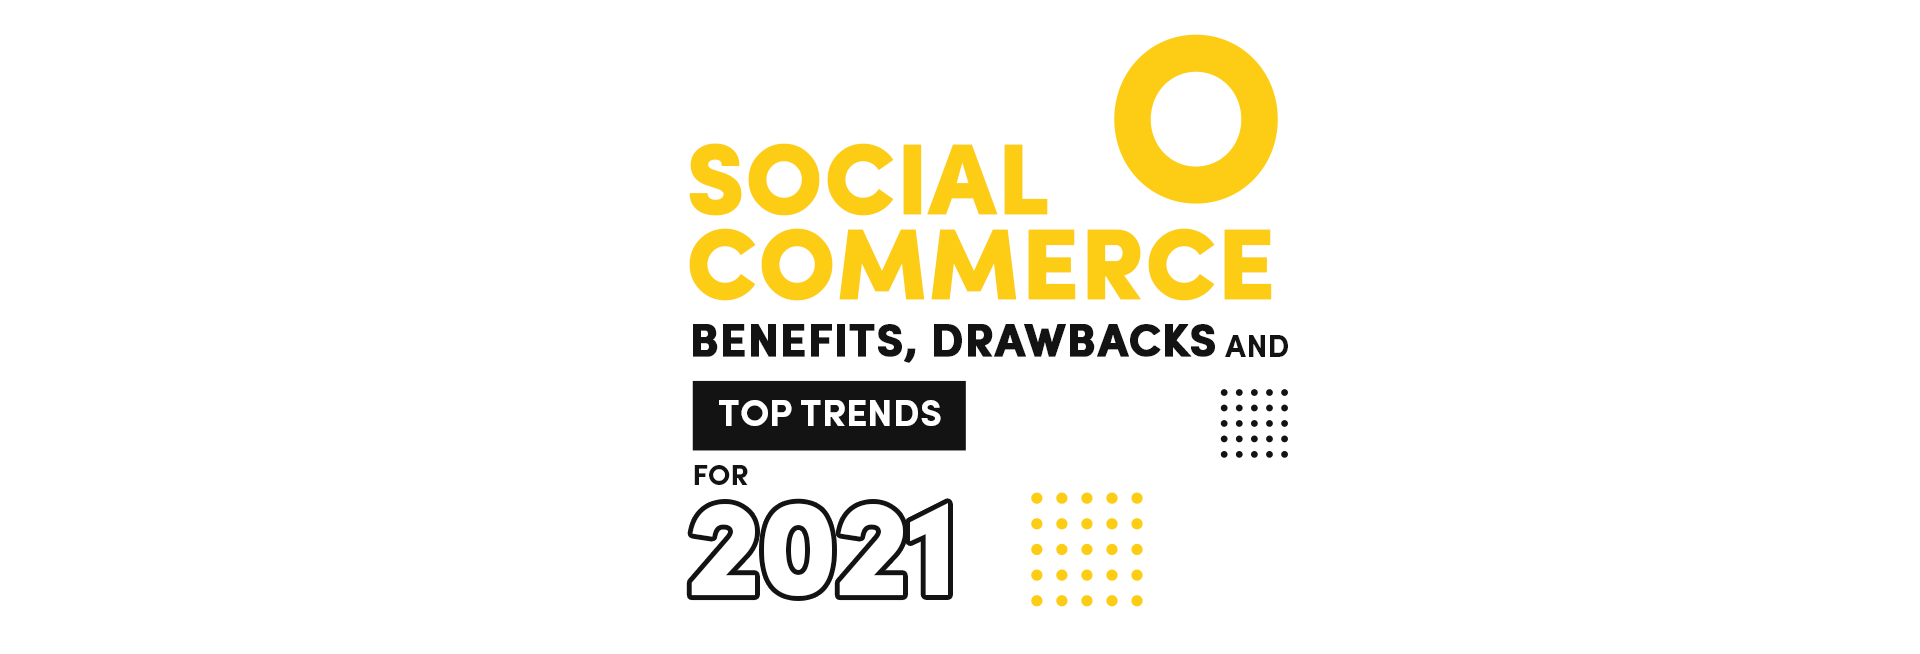 Social Commerce Benefits, Drawbacks and Top Trends for 2021